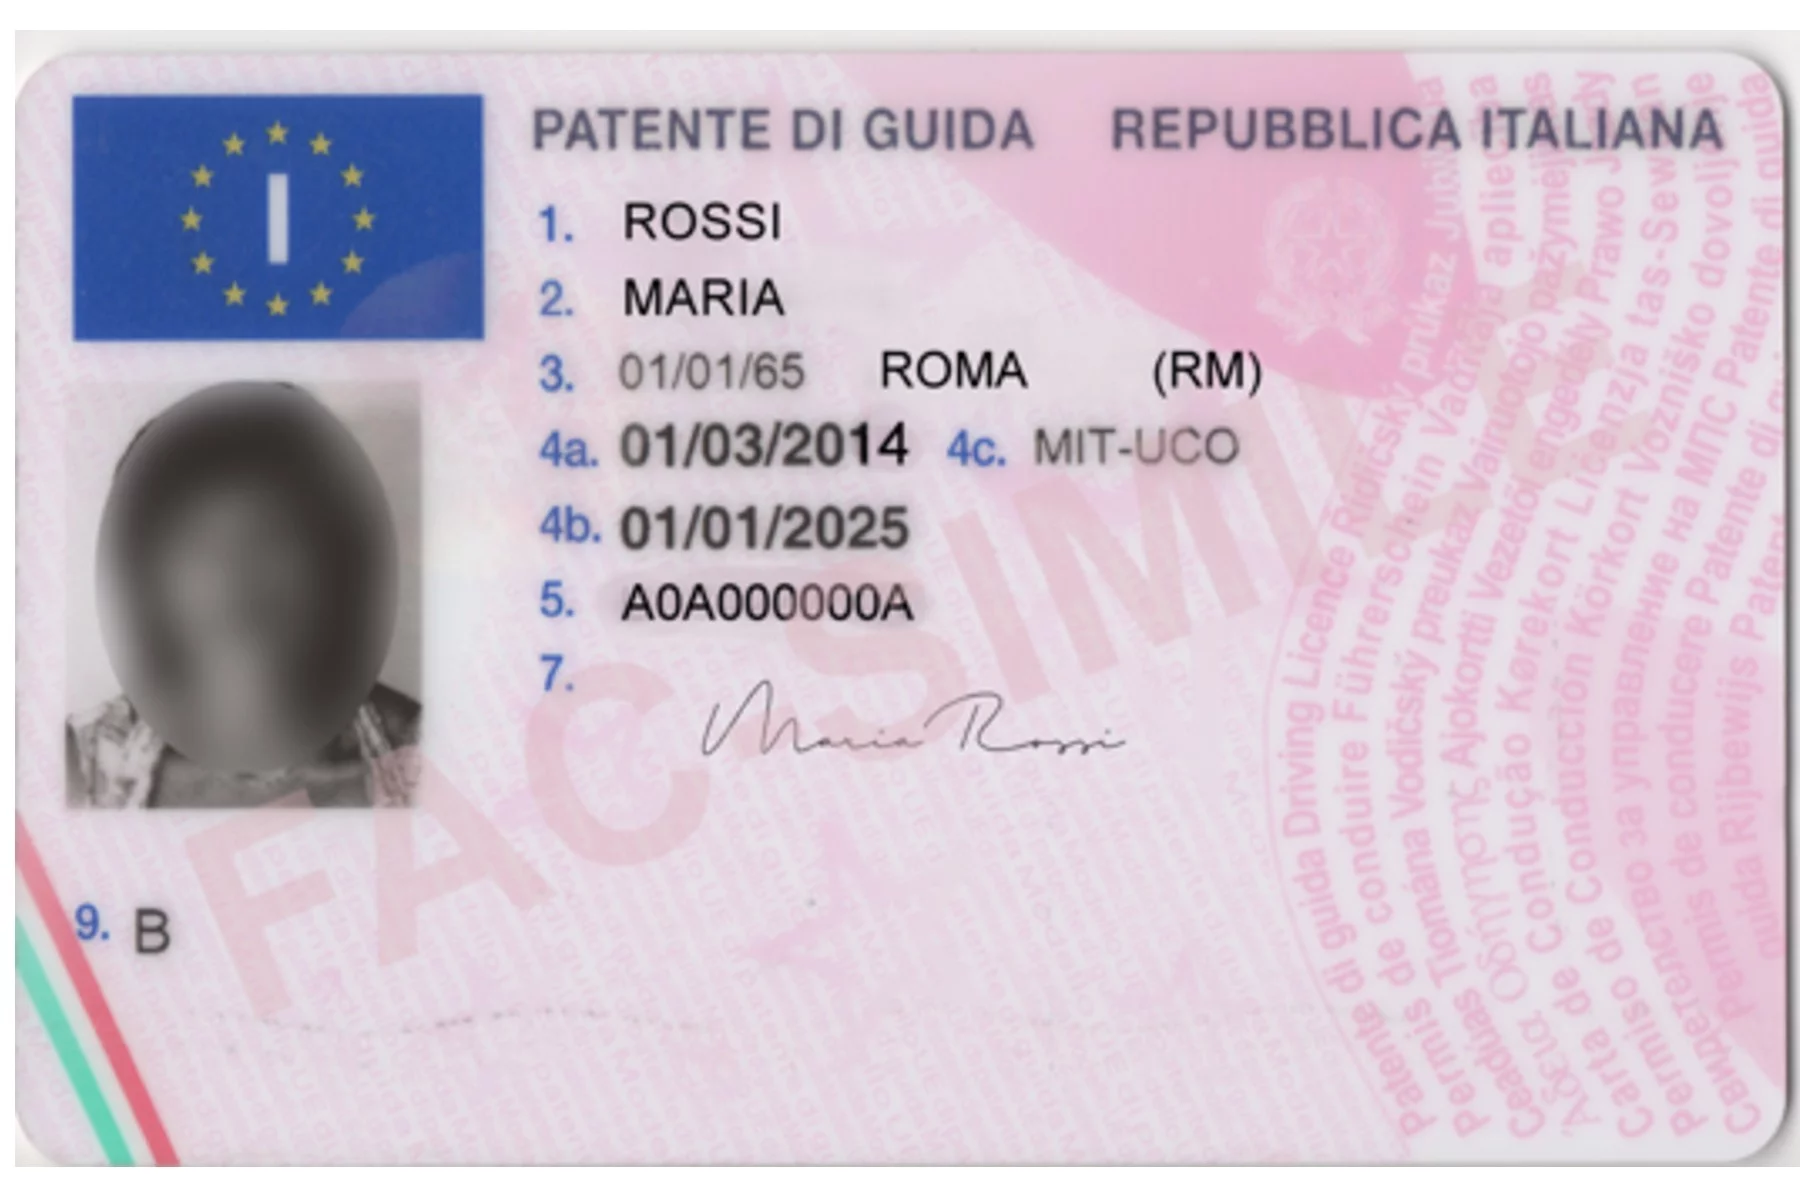 Example of a driving license in Italy